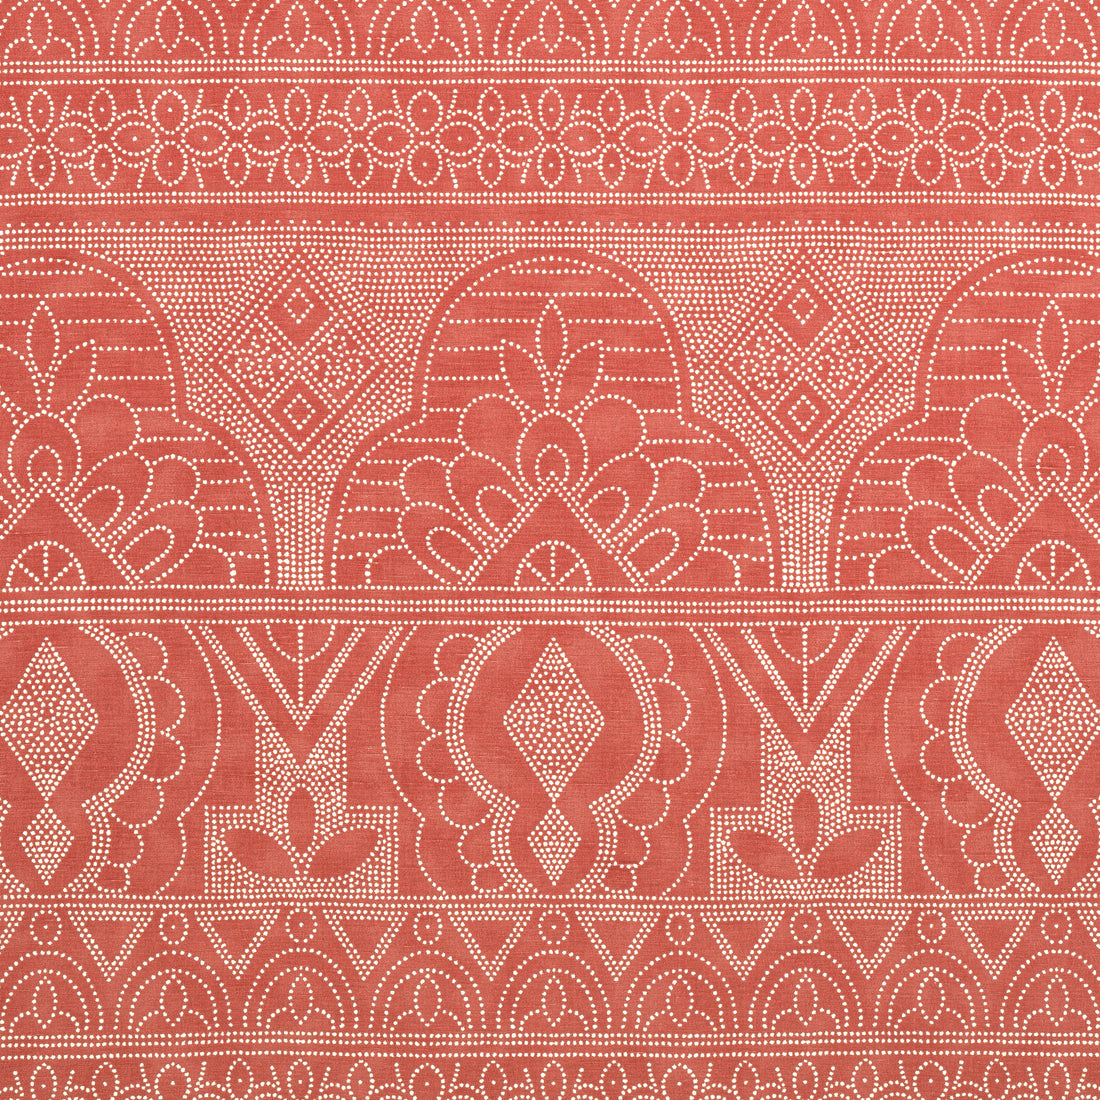 Medinas fabric in sunbaked color - pattern number F981304 - by Thibaut in the Montecito collection